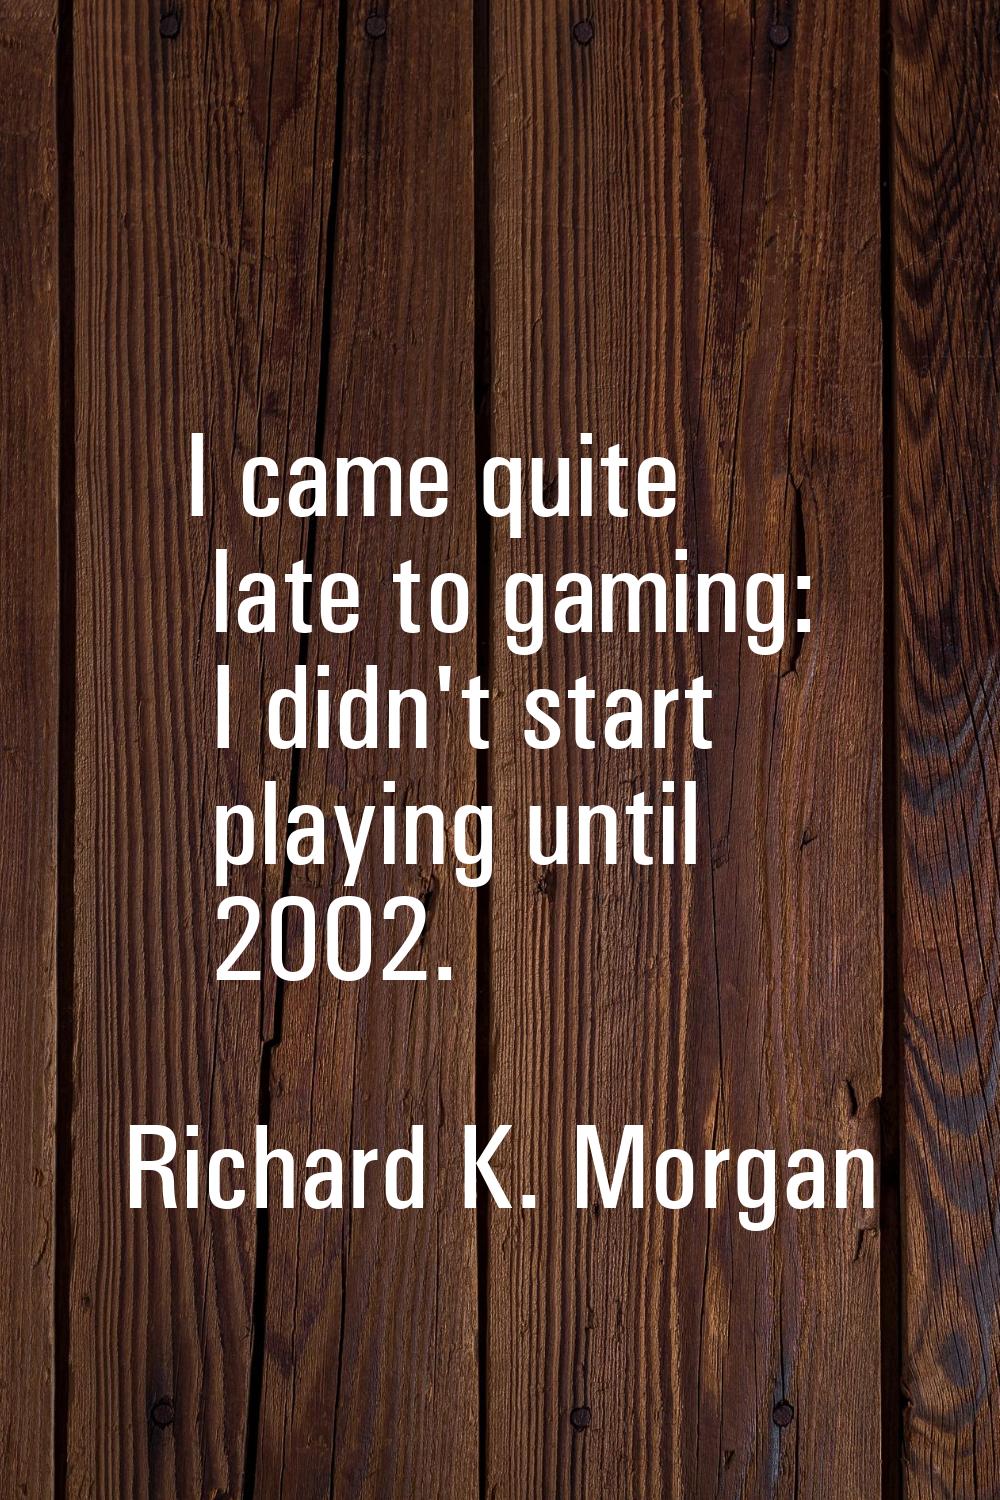 I came quite late to gaming: I didn't start playing until 2002.